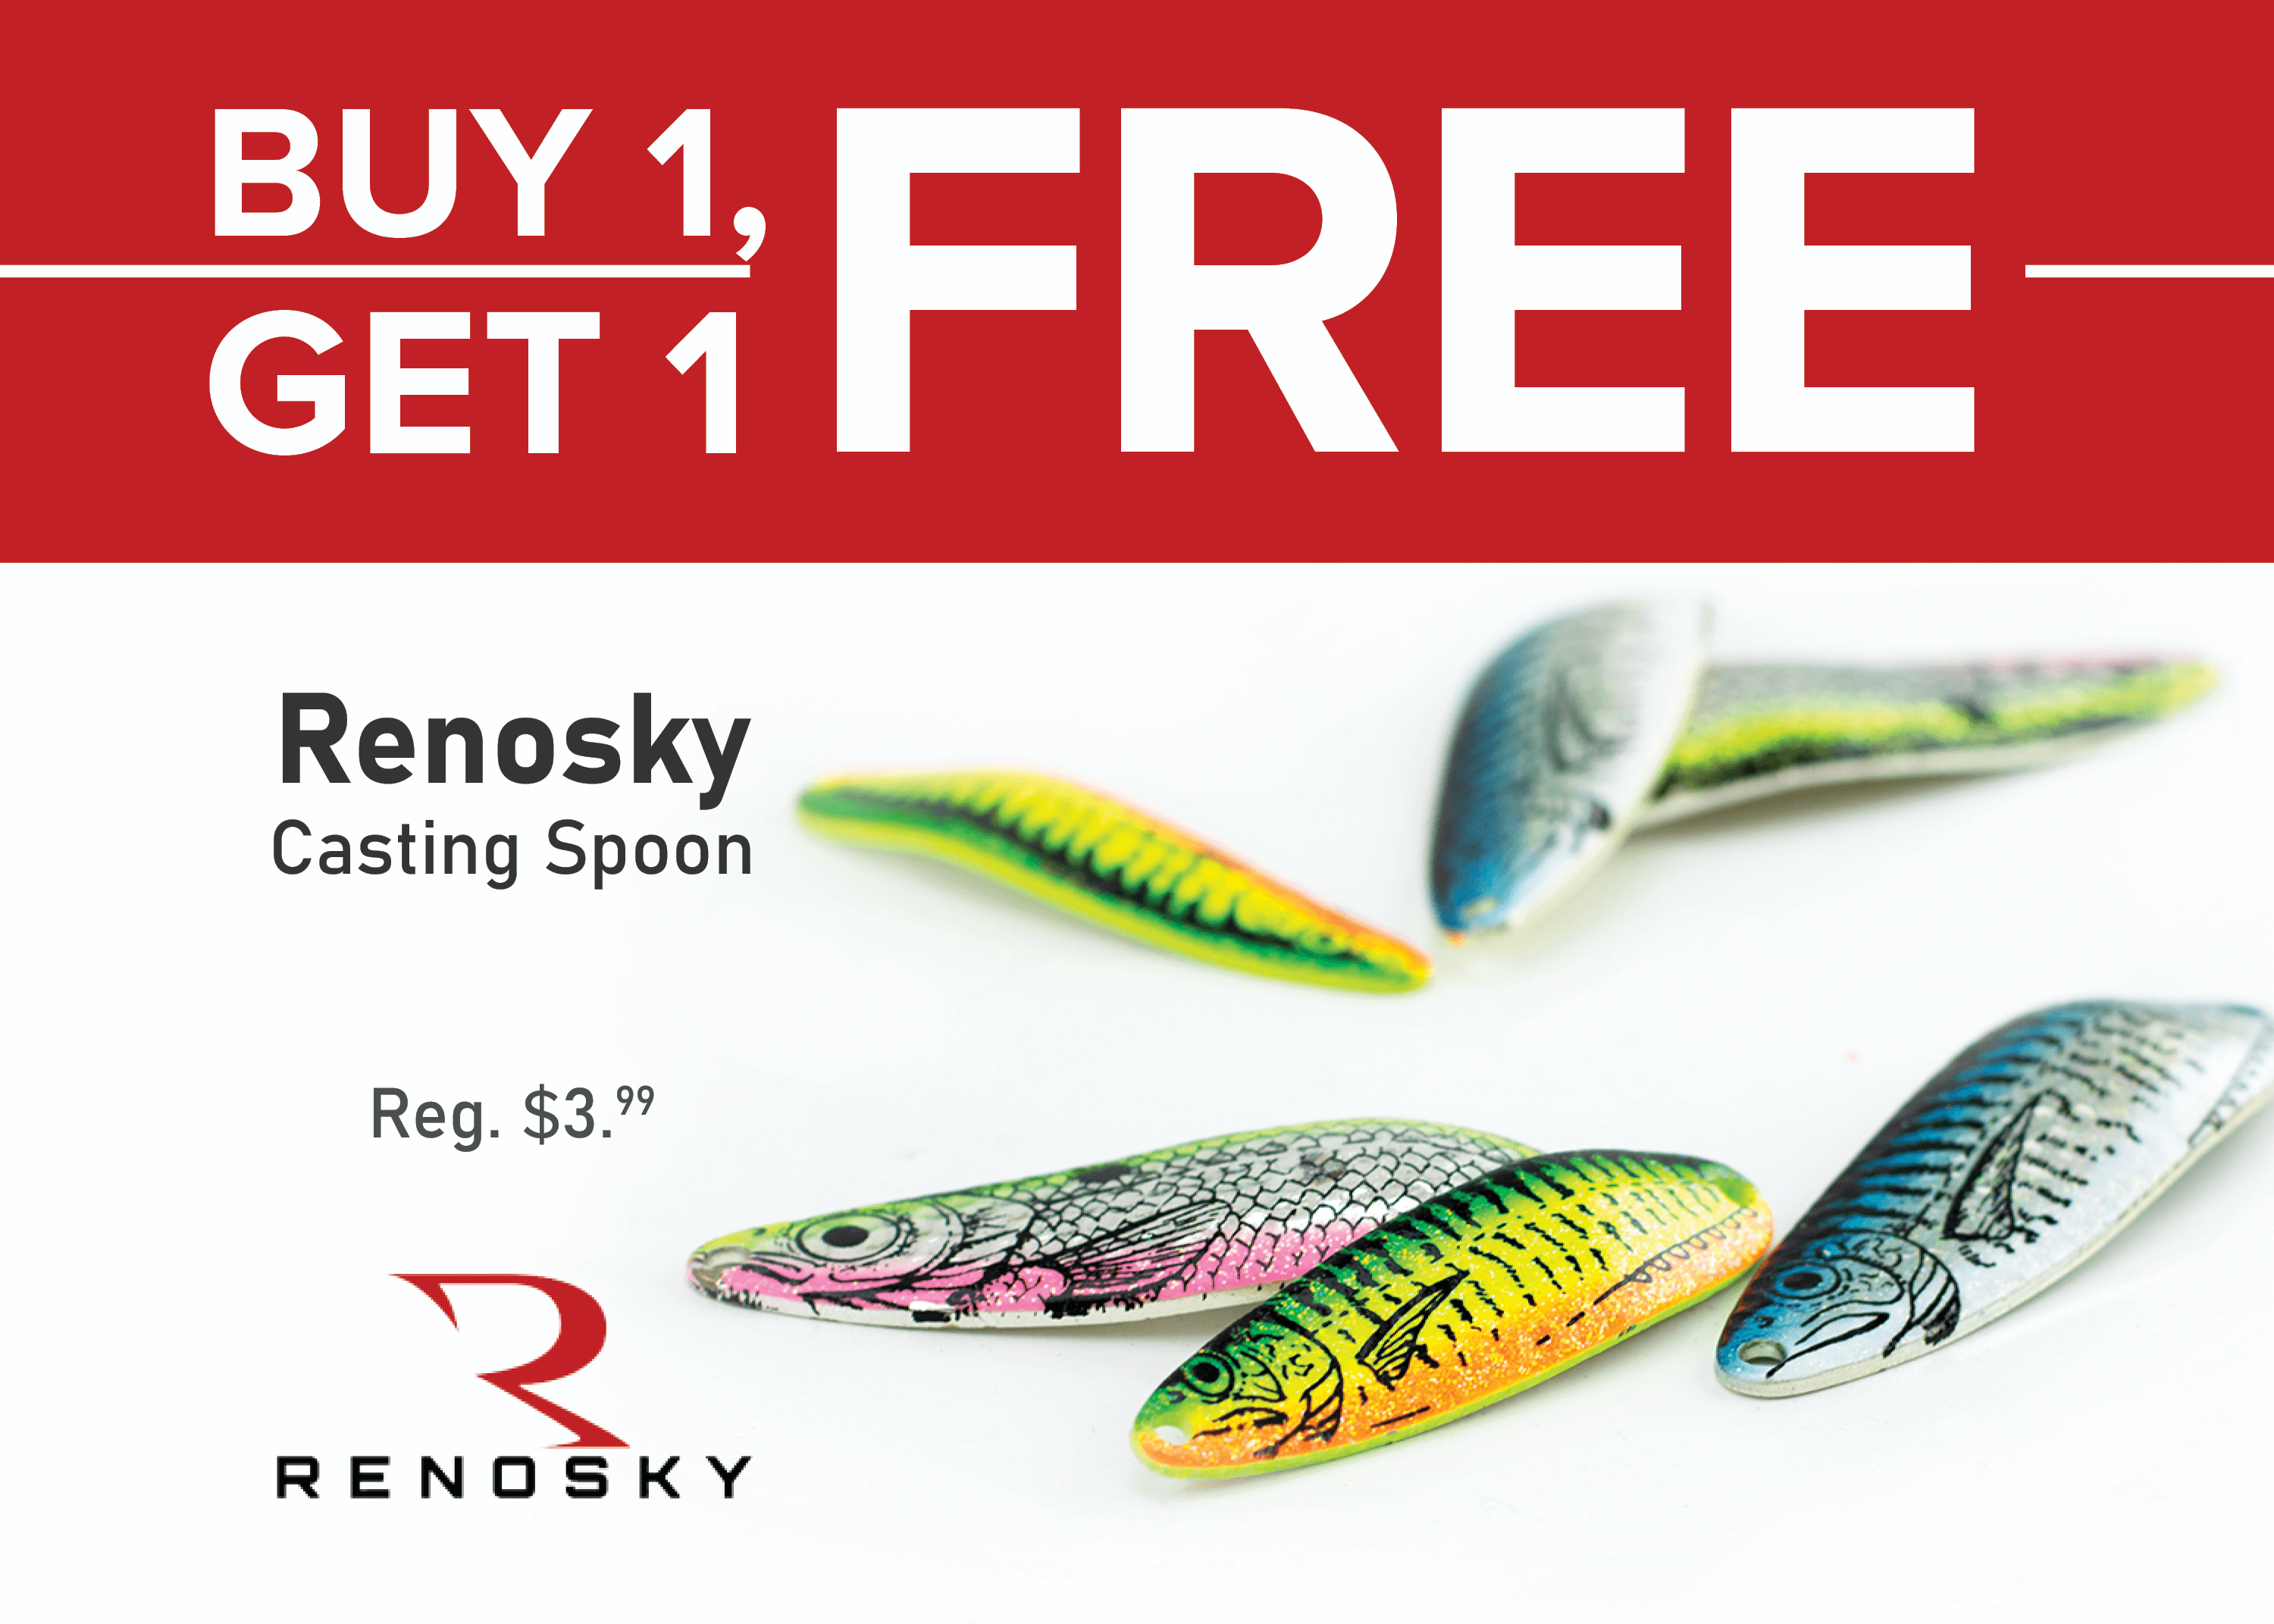 Buy 1, Get 1 FREE on Renosky Casting Spoon